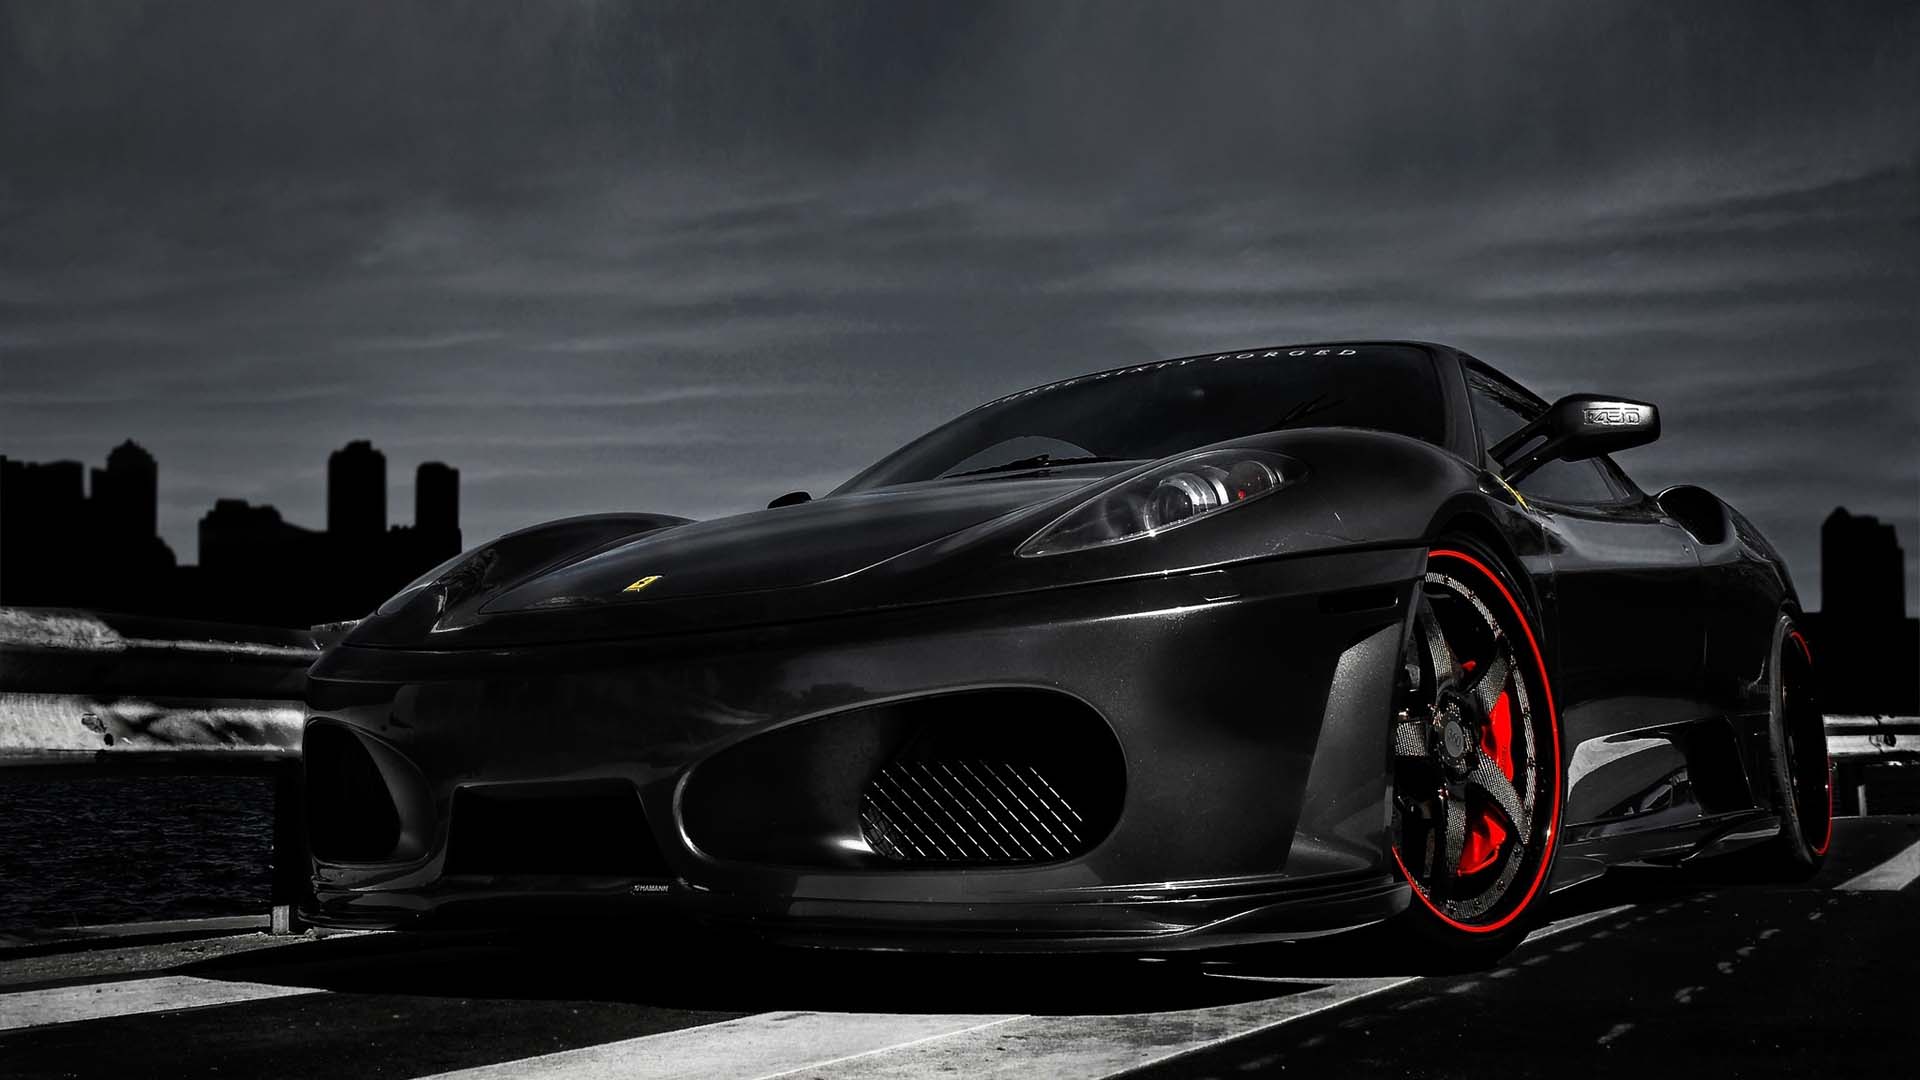 Ferrari wallpapers in HD free to download